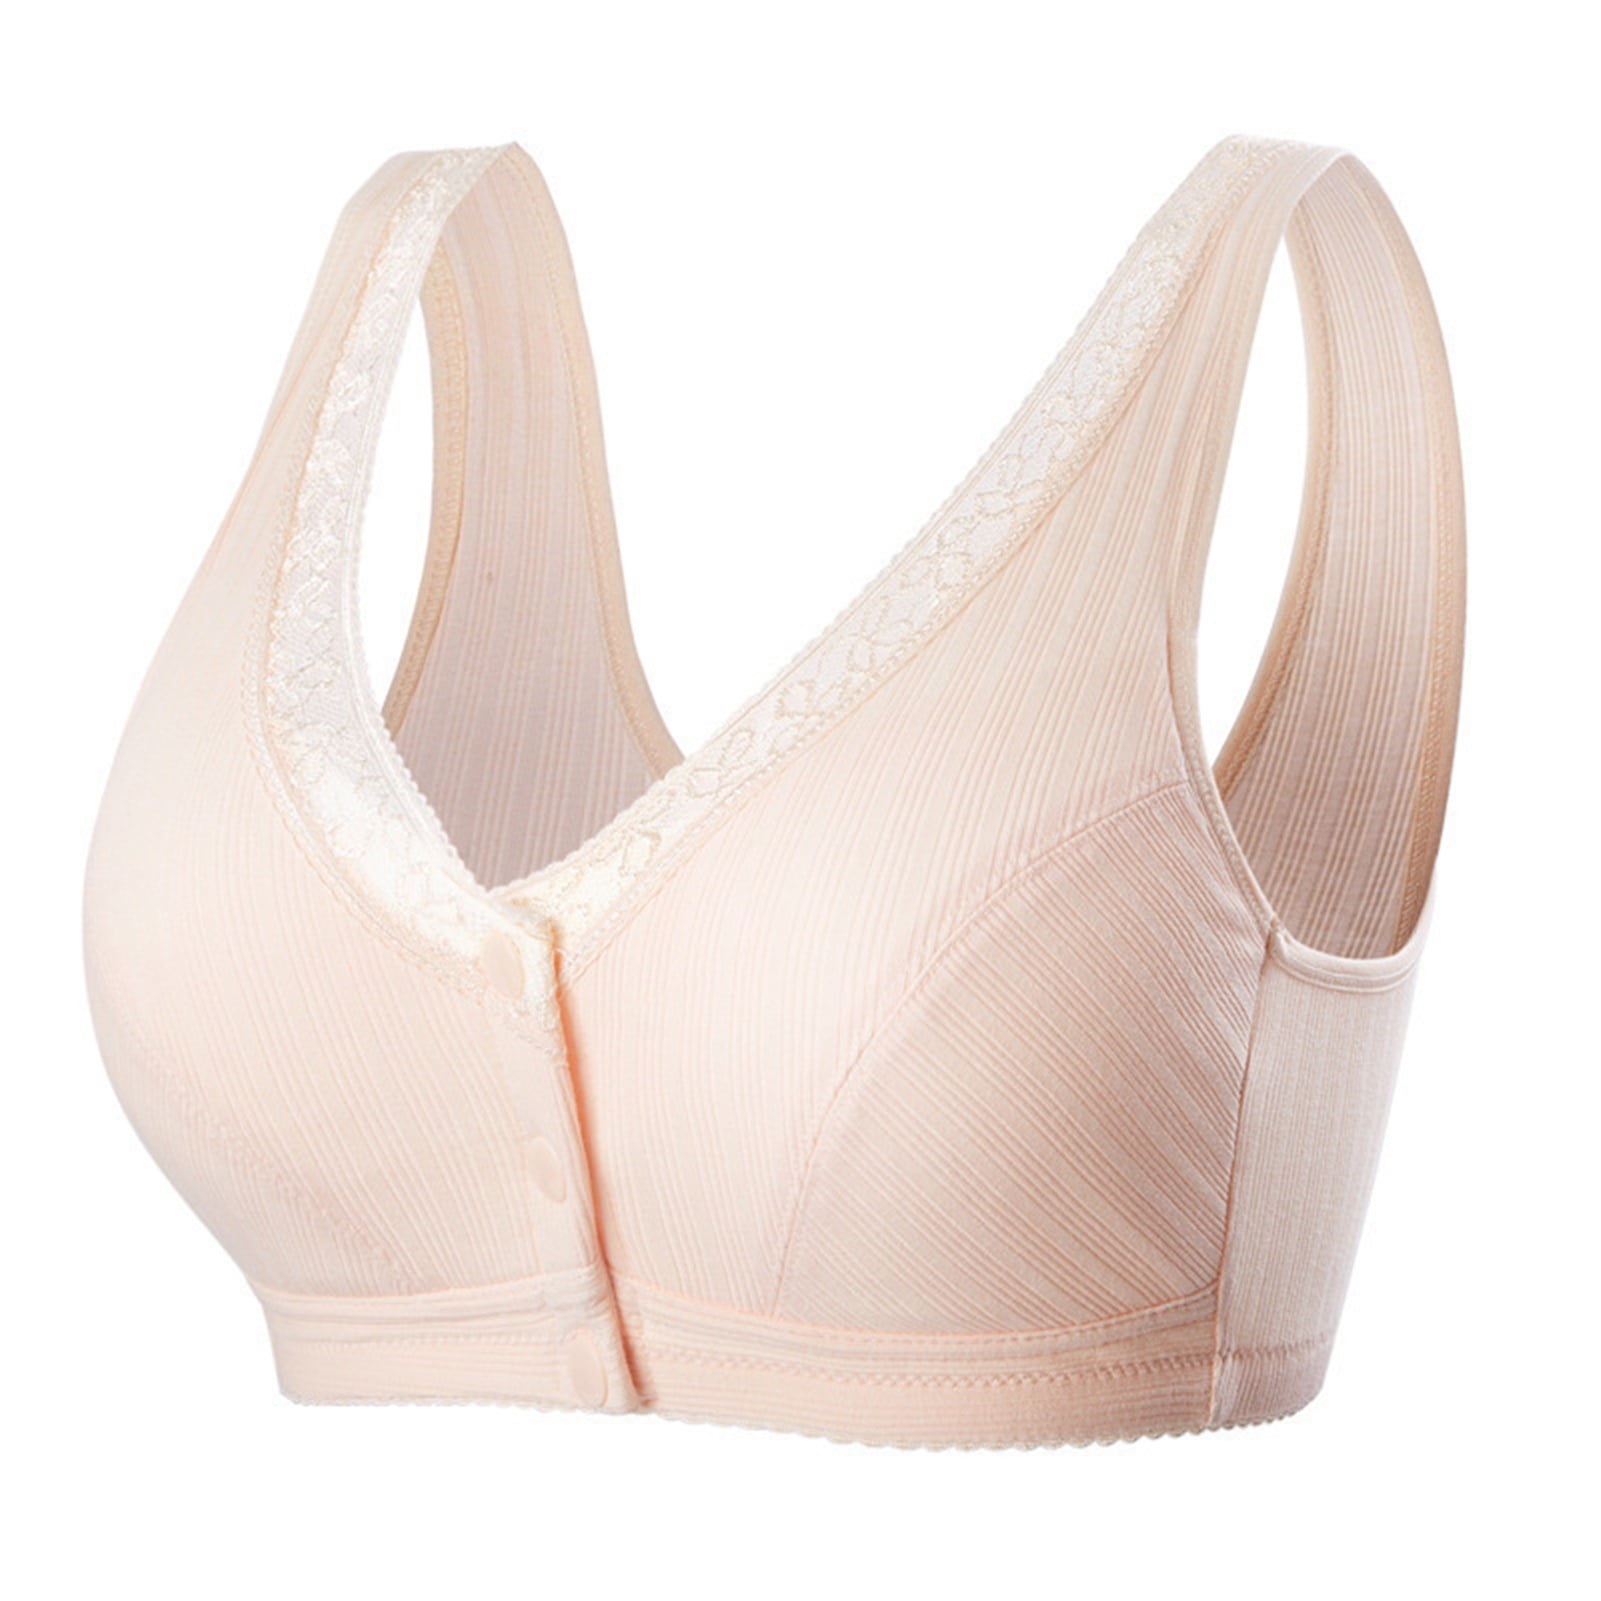 Comfortable Cotton Large Size Bra with Front Button Wireless